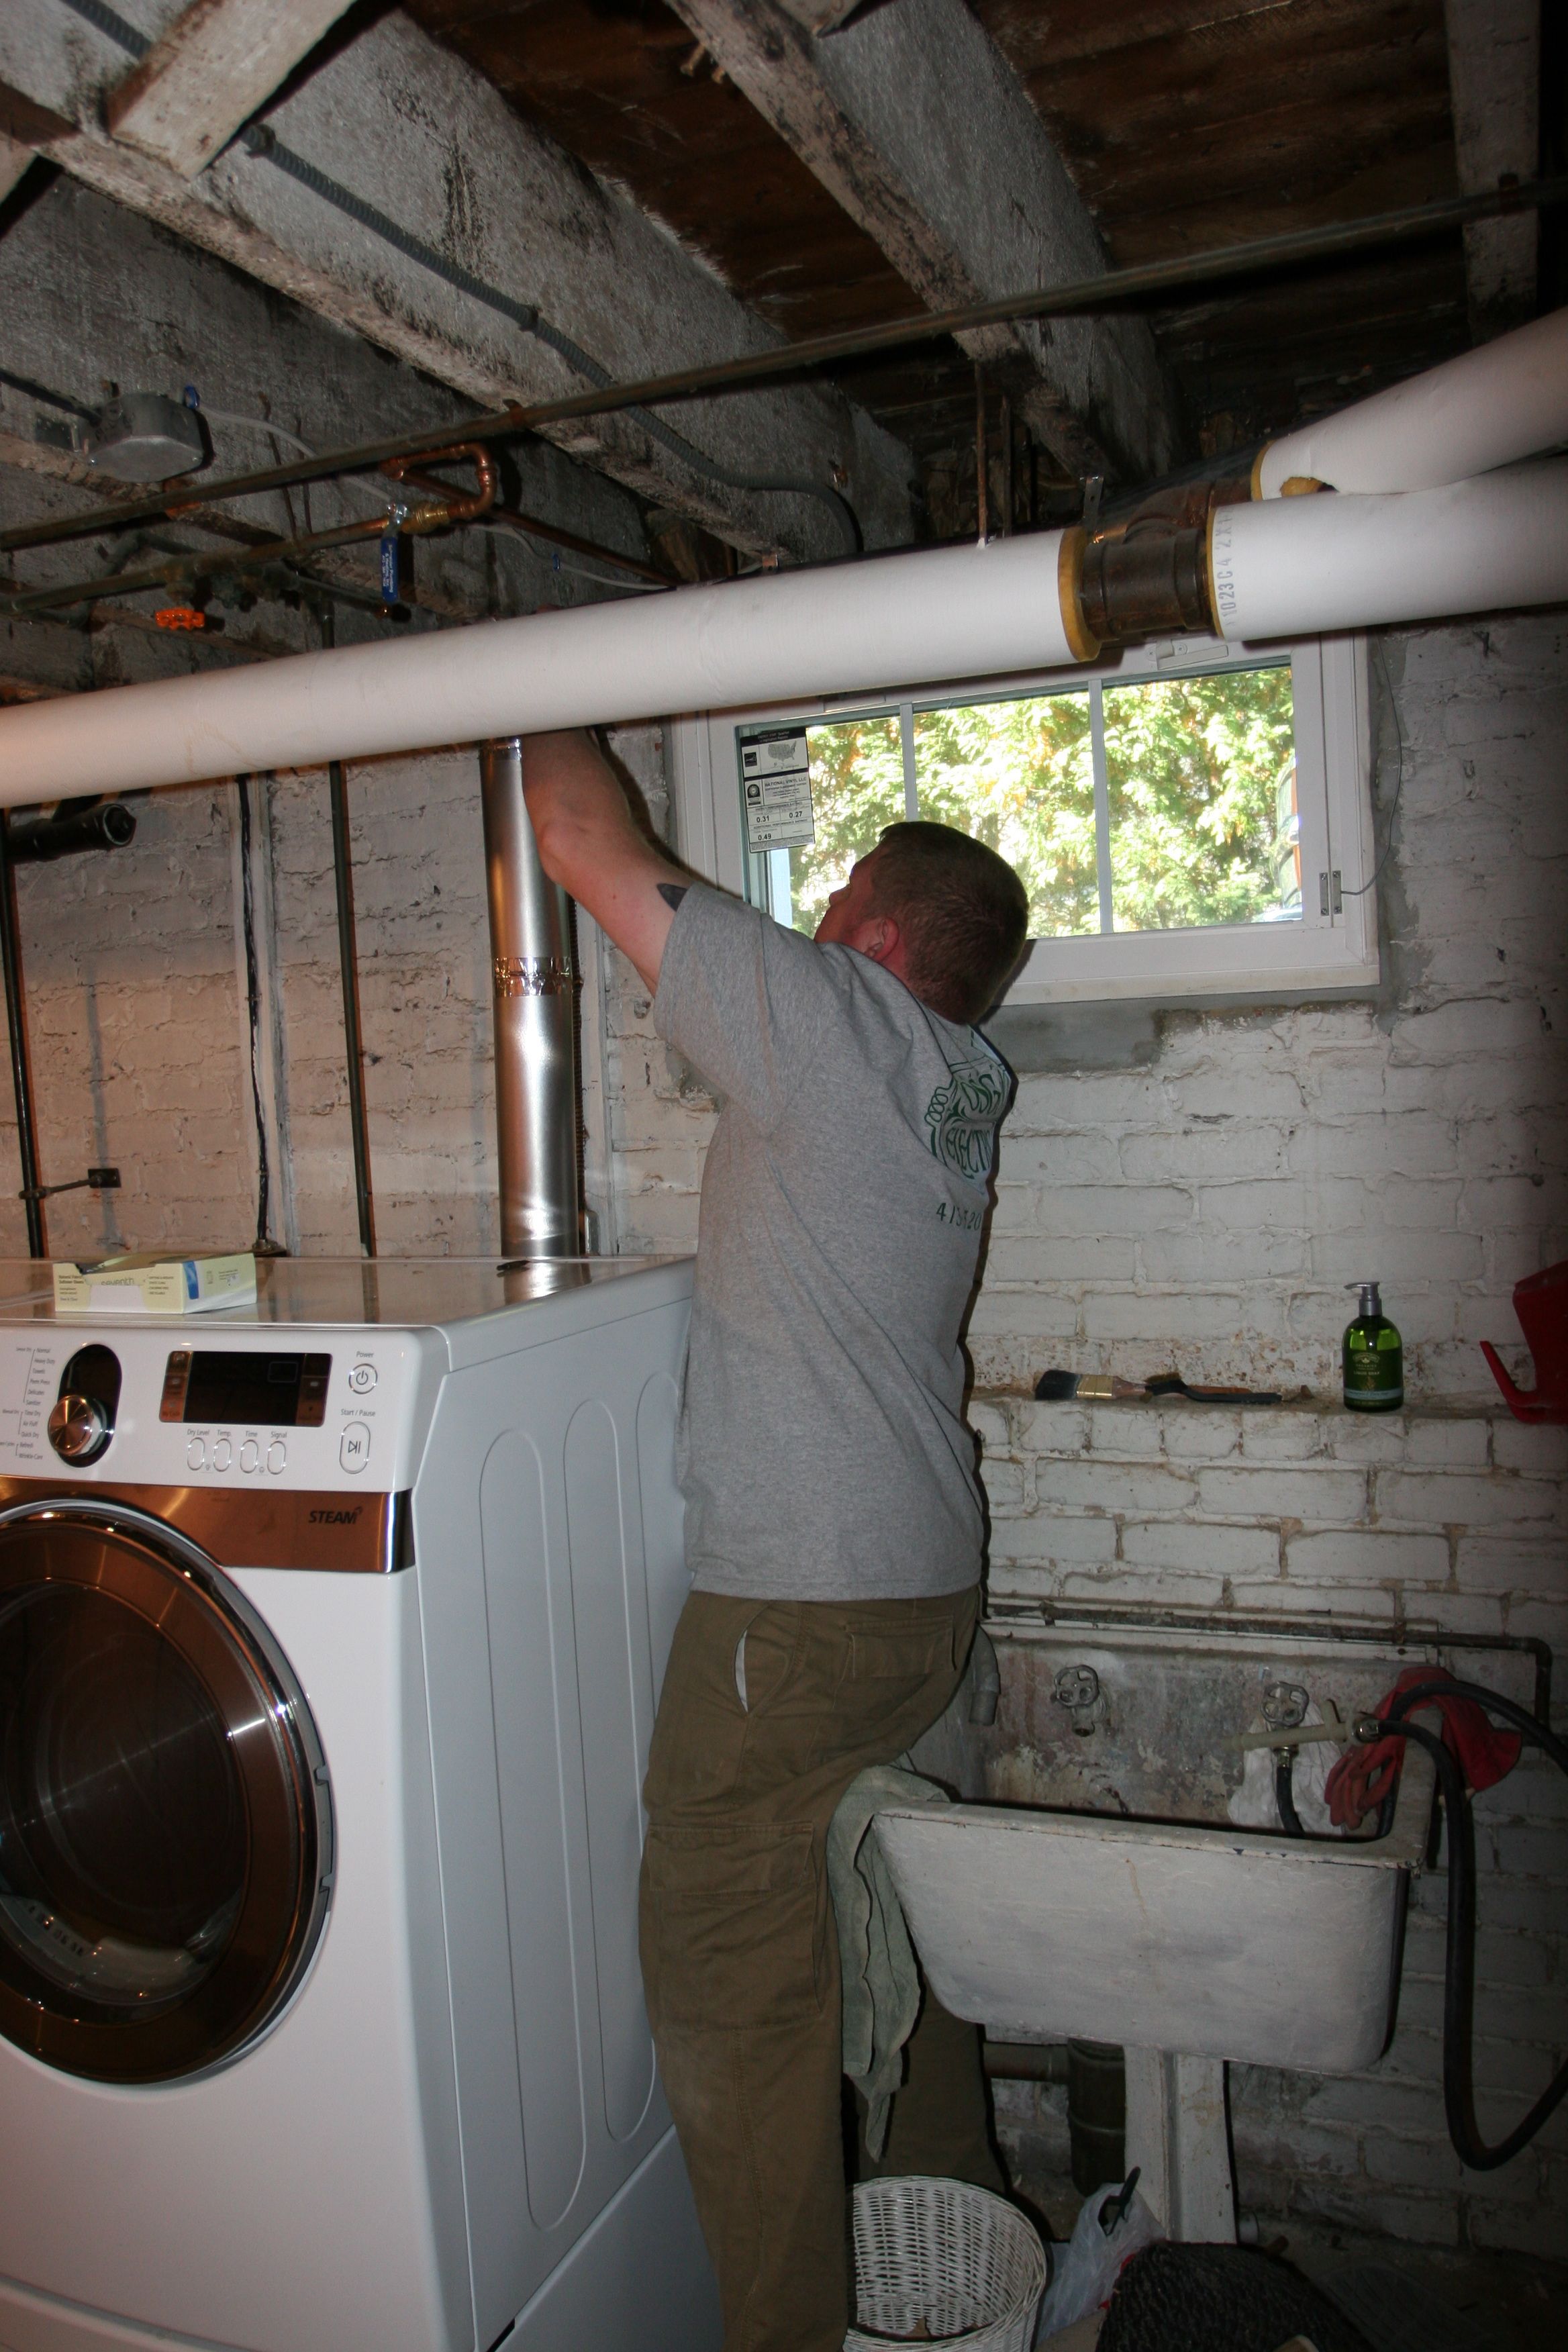 Brad fixing up our dryer vent. We have clean clothes again!